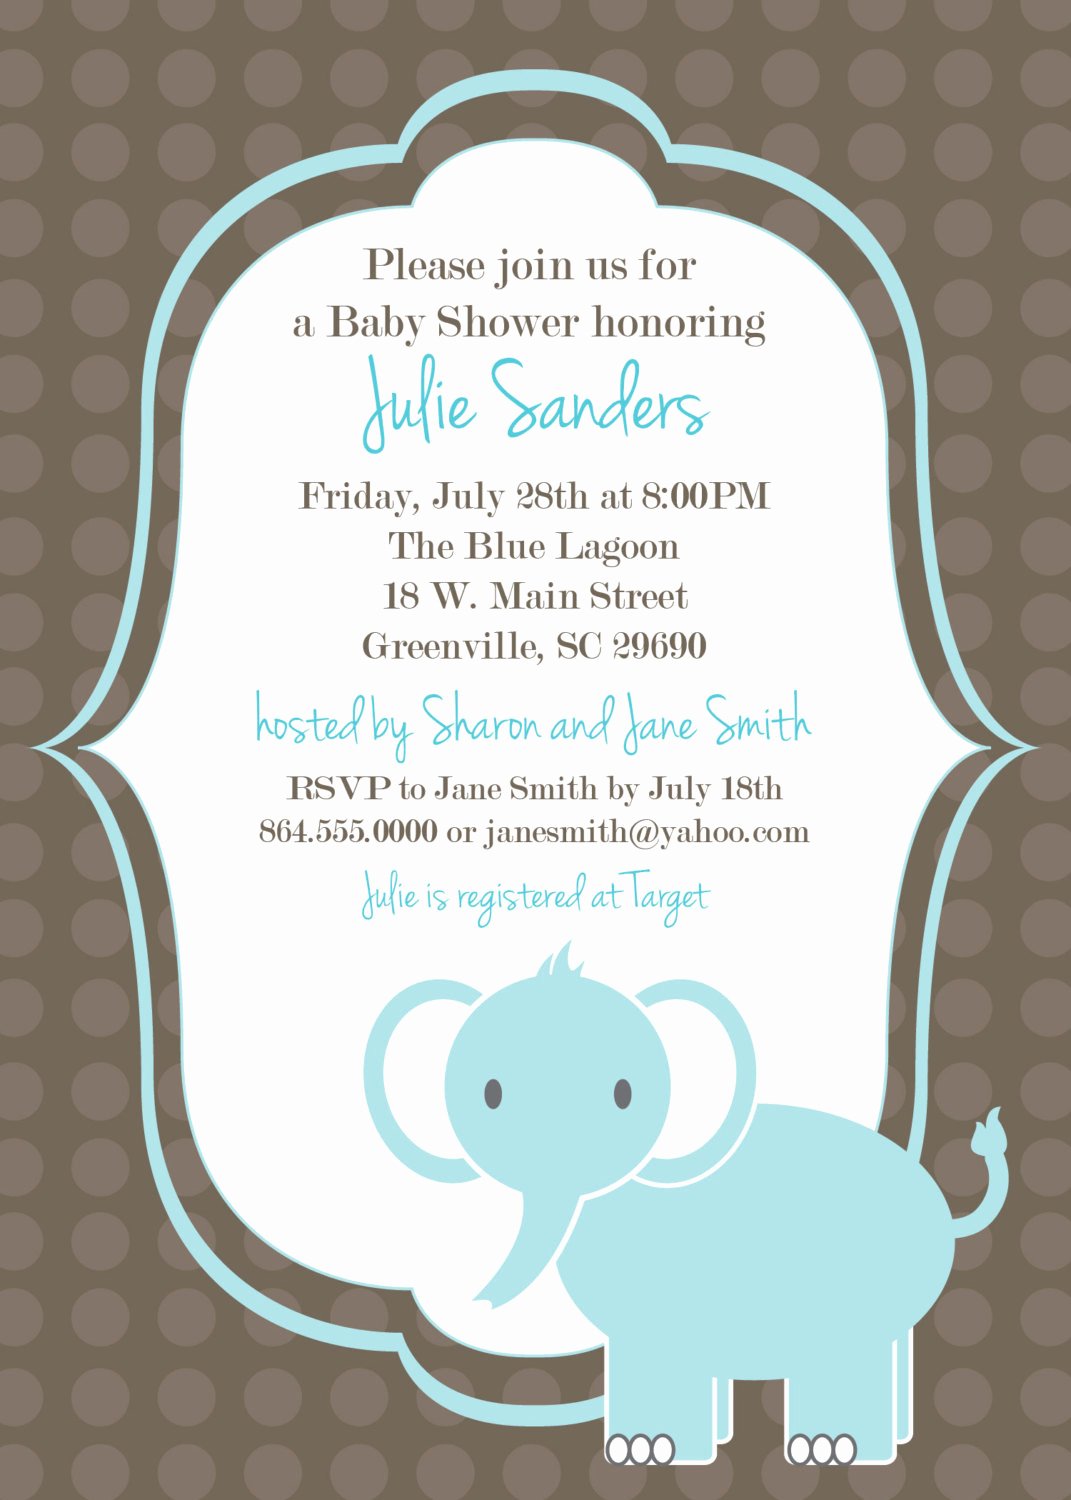 Baby Shower Invitations Templates Editable Unique Printable Baby Shower Invitation Elephant Boy by Ohcreative E